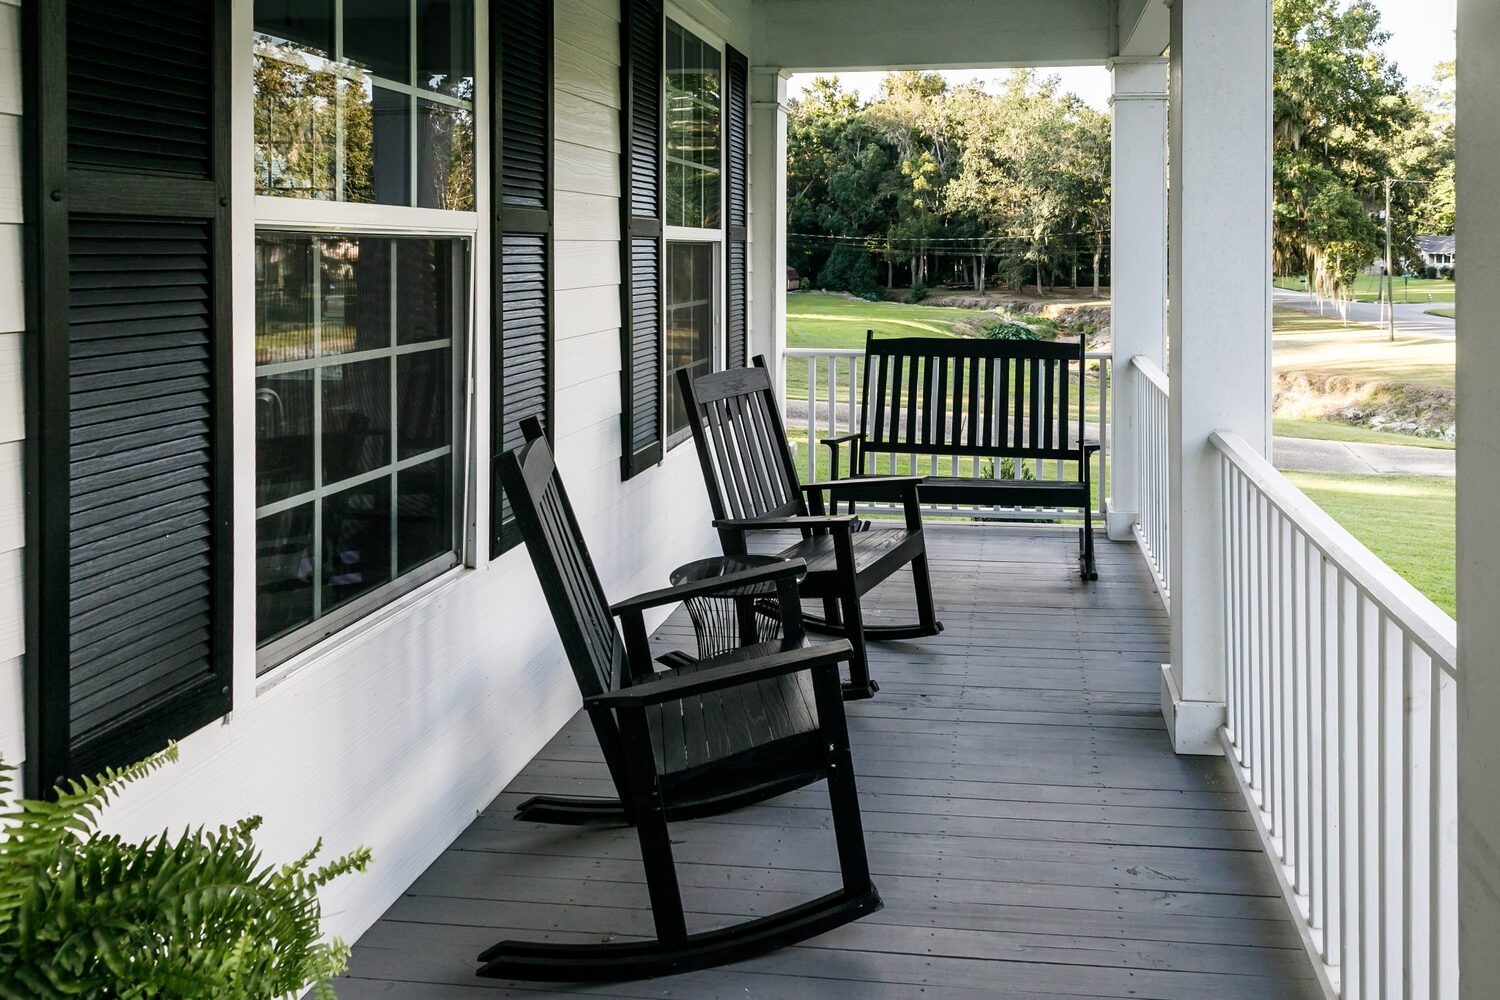 The result of the hard work of the porch builders Evanston team is a stunning white wooden porch